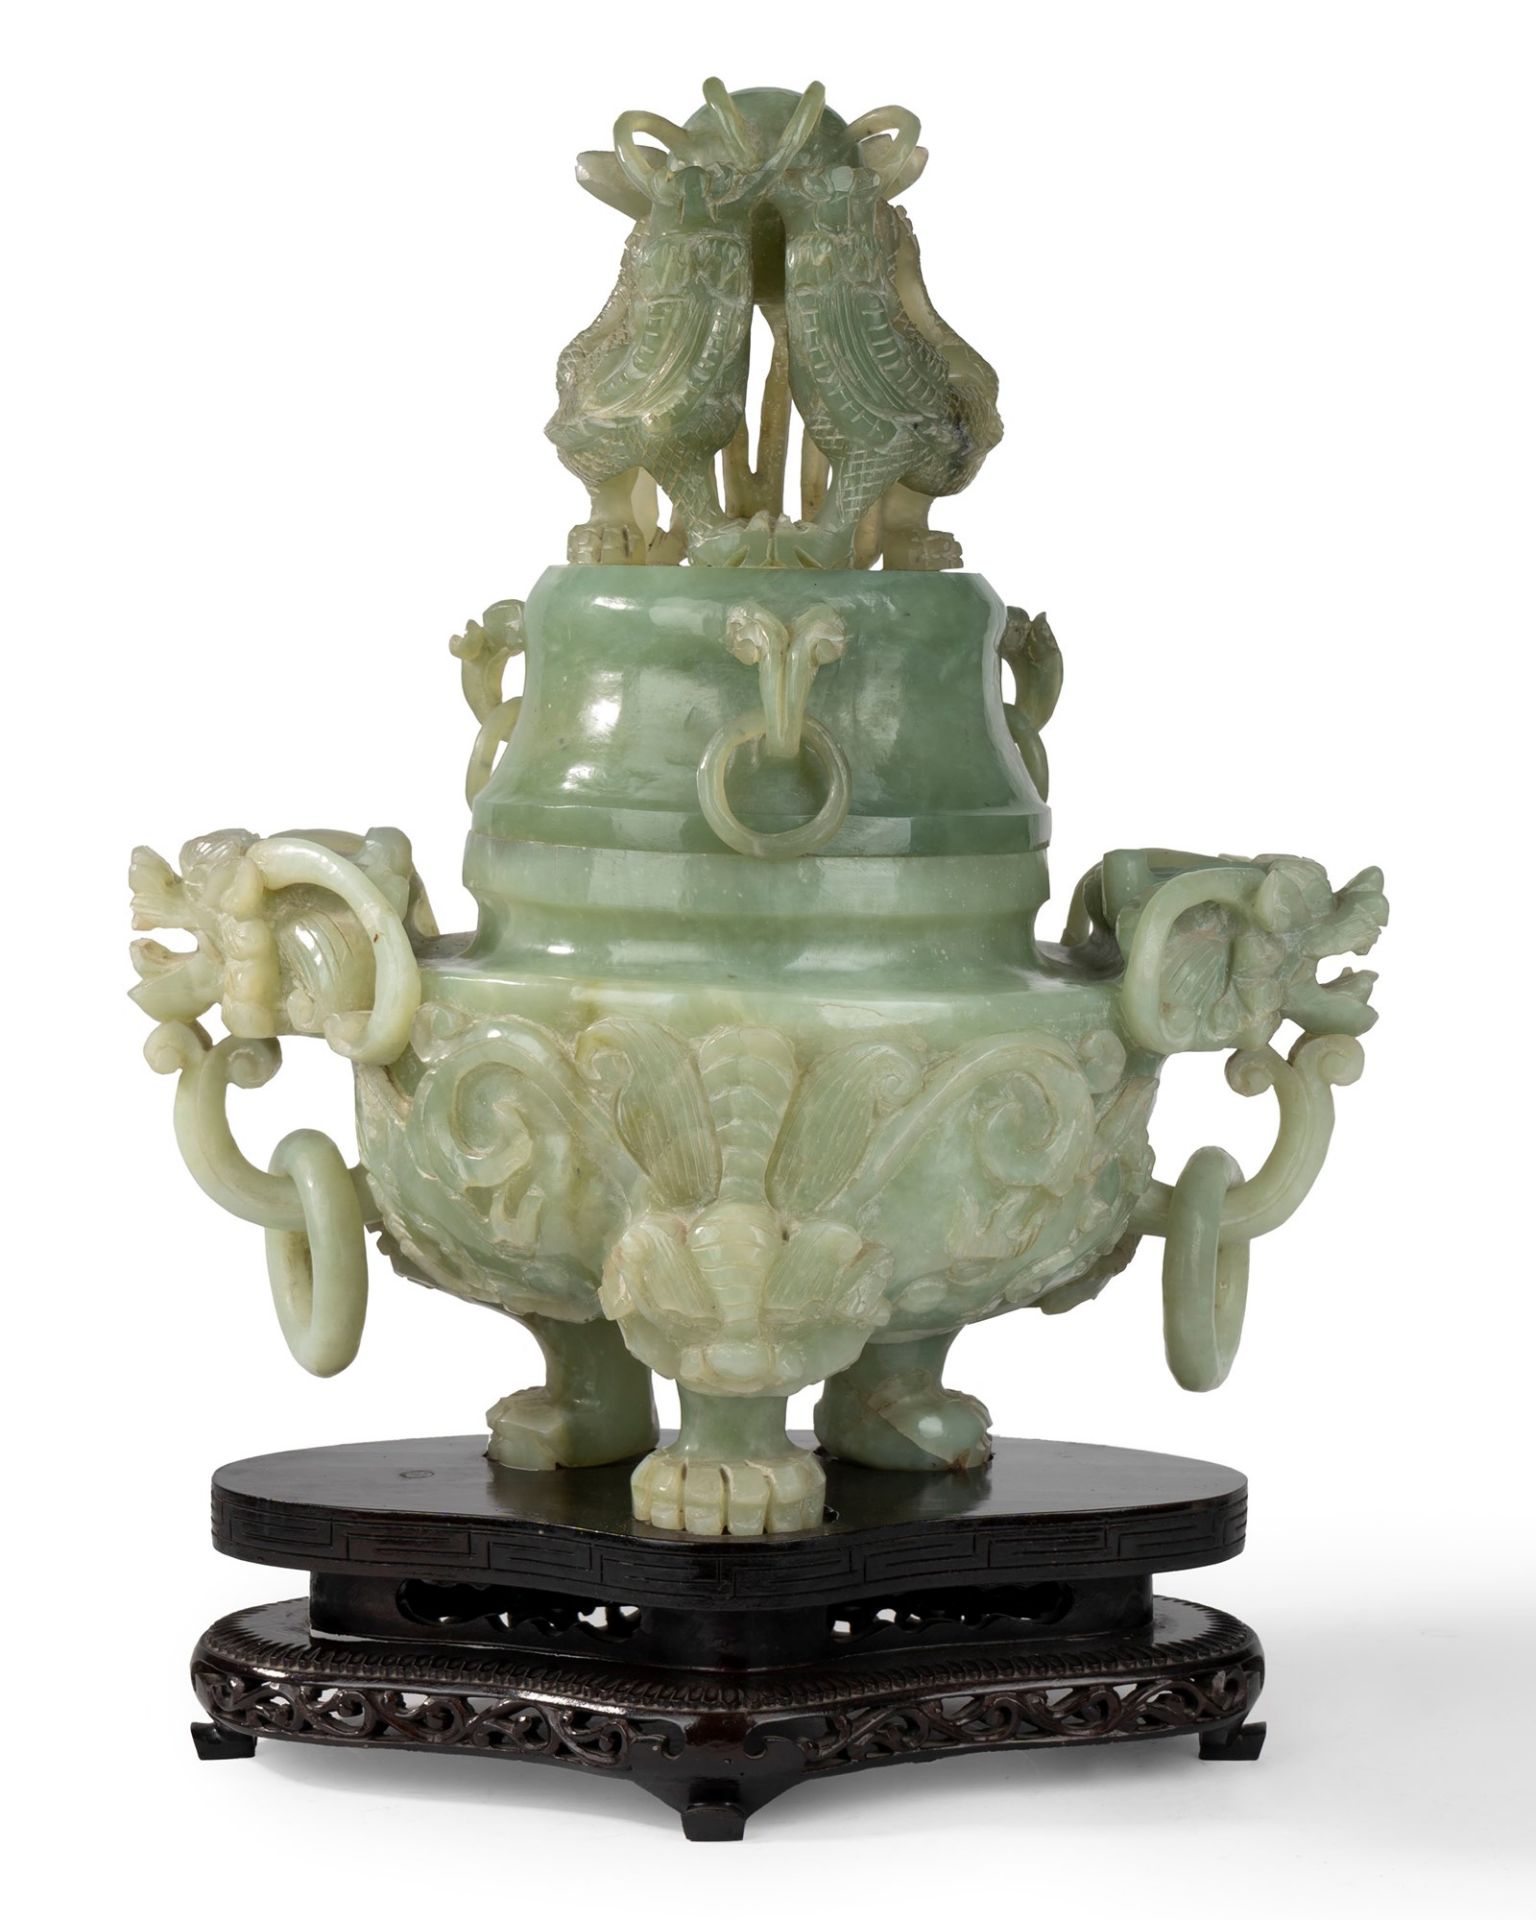 Tripod in green stone with masks and rings on a wooden base, China, 20th century